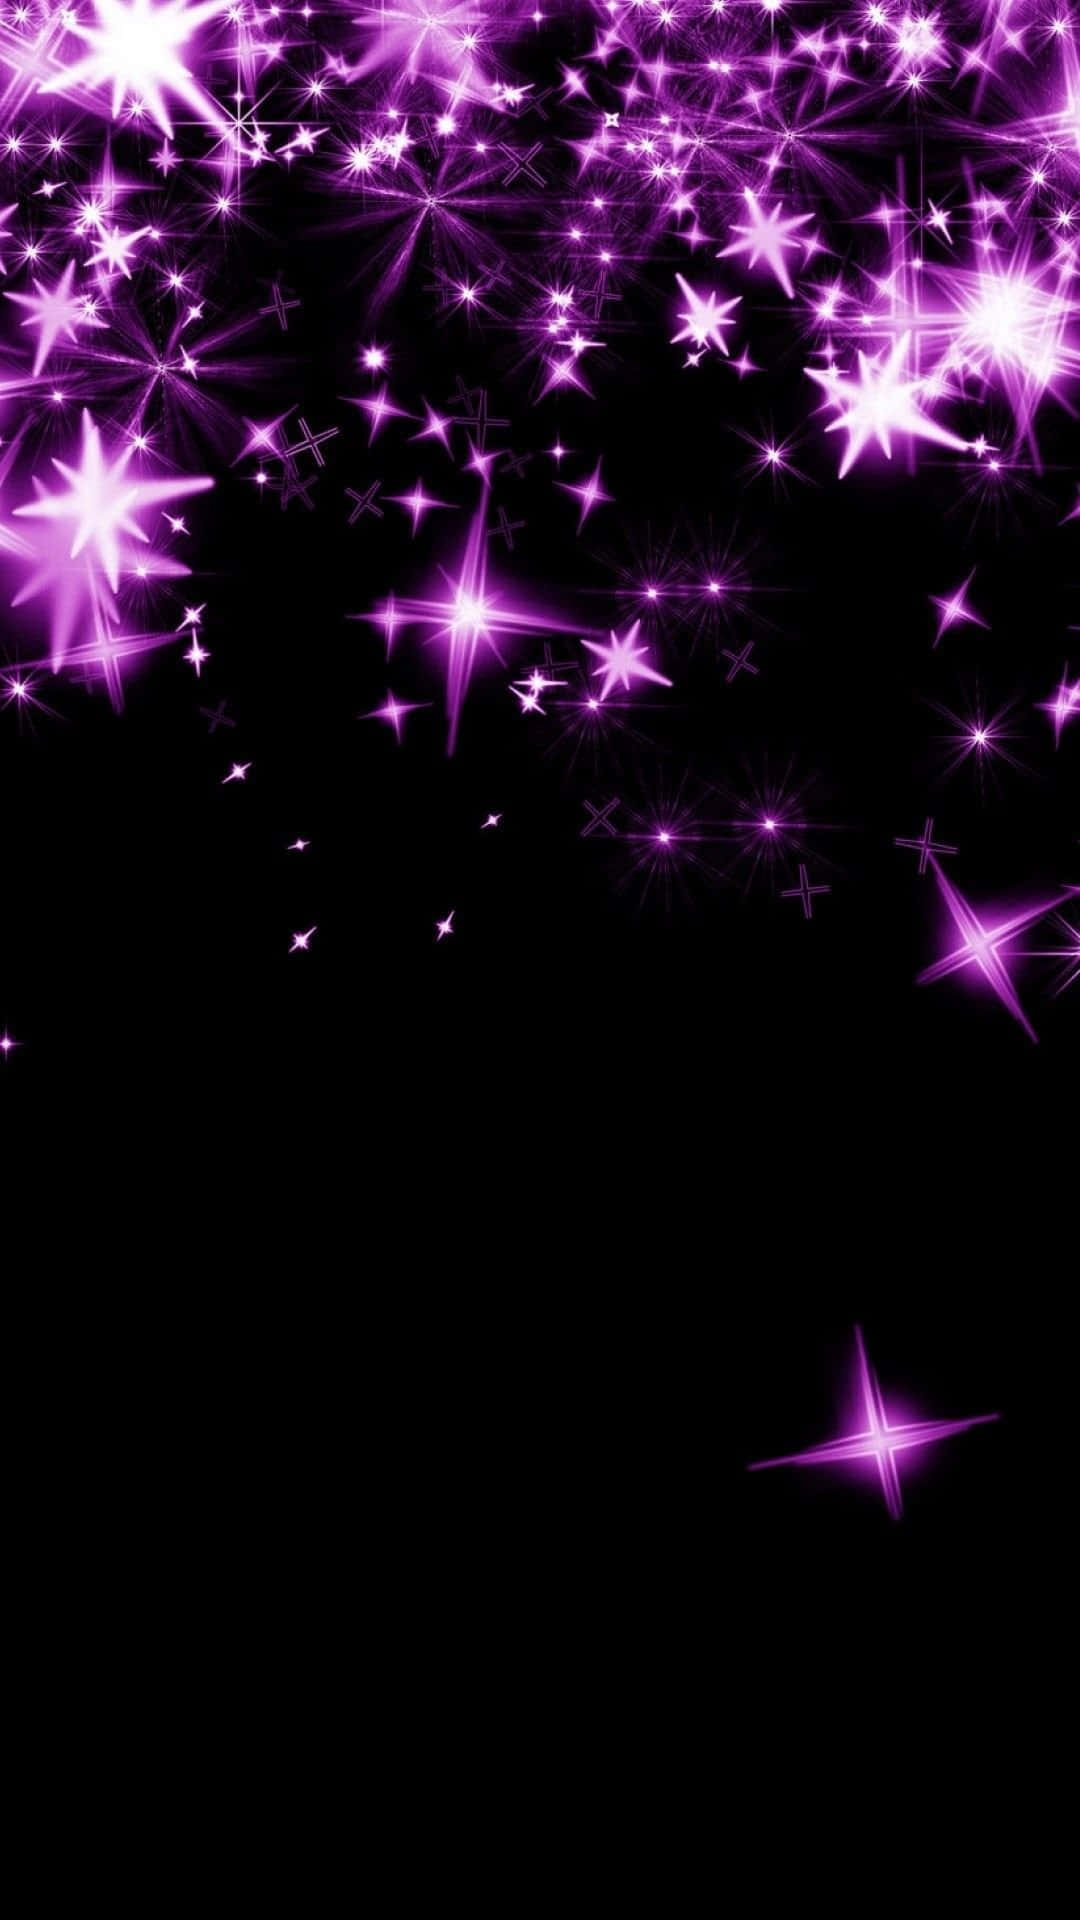 A Mesmerizing Pink Galaxy With Glowing Stars Background